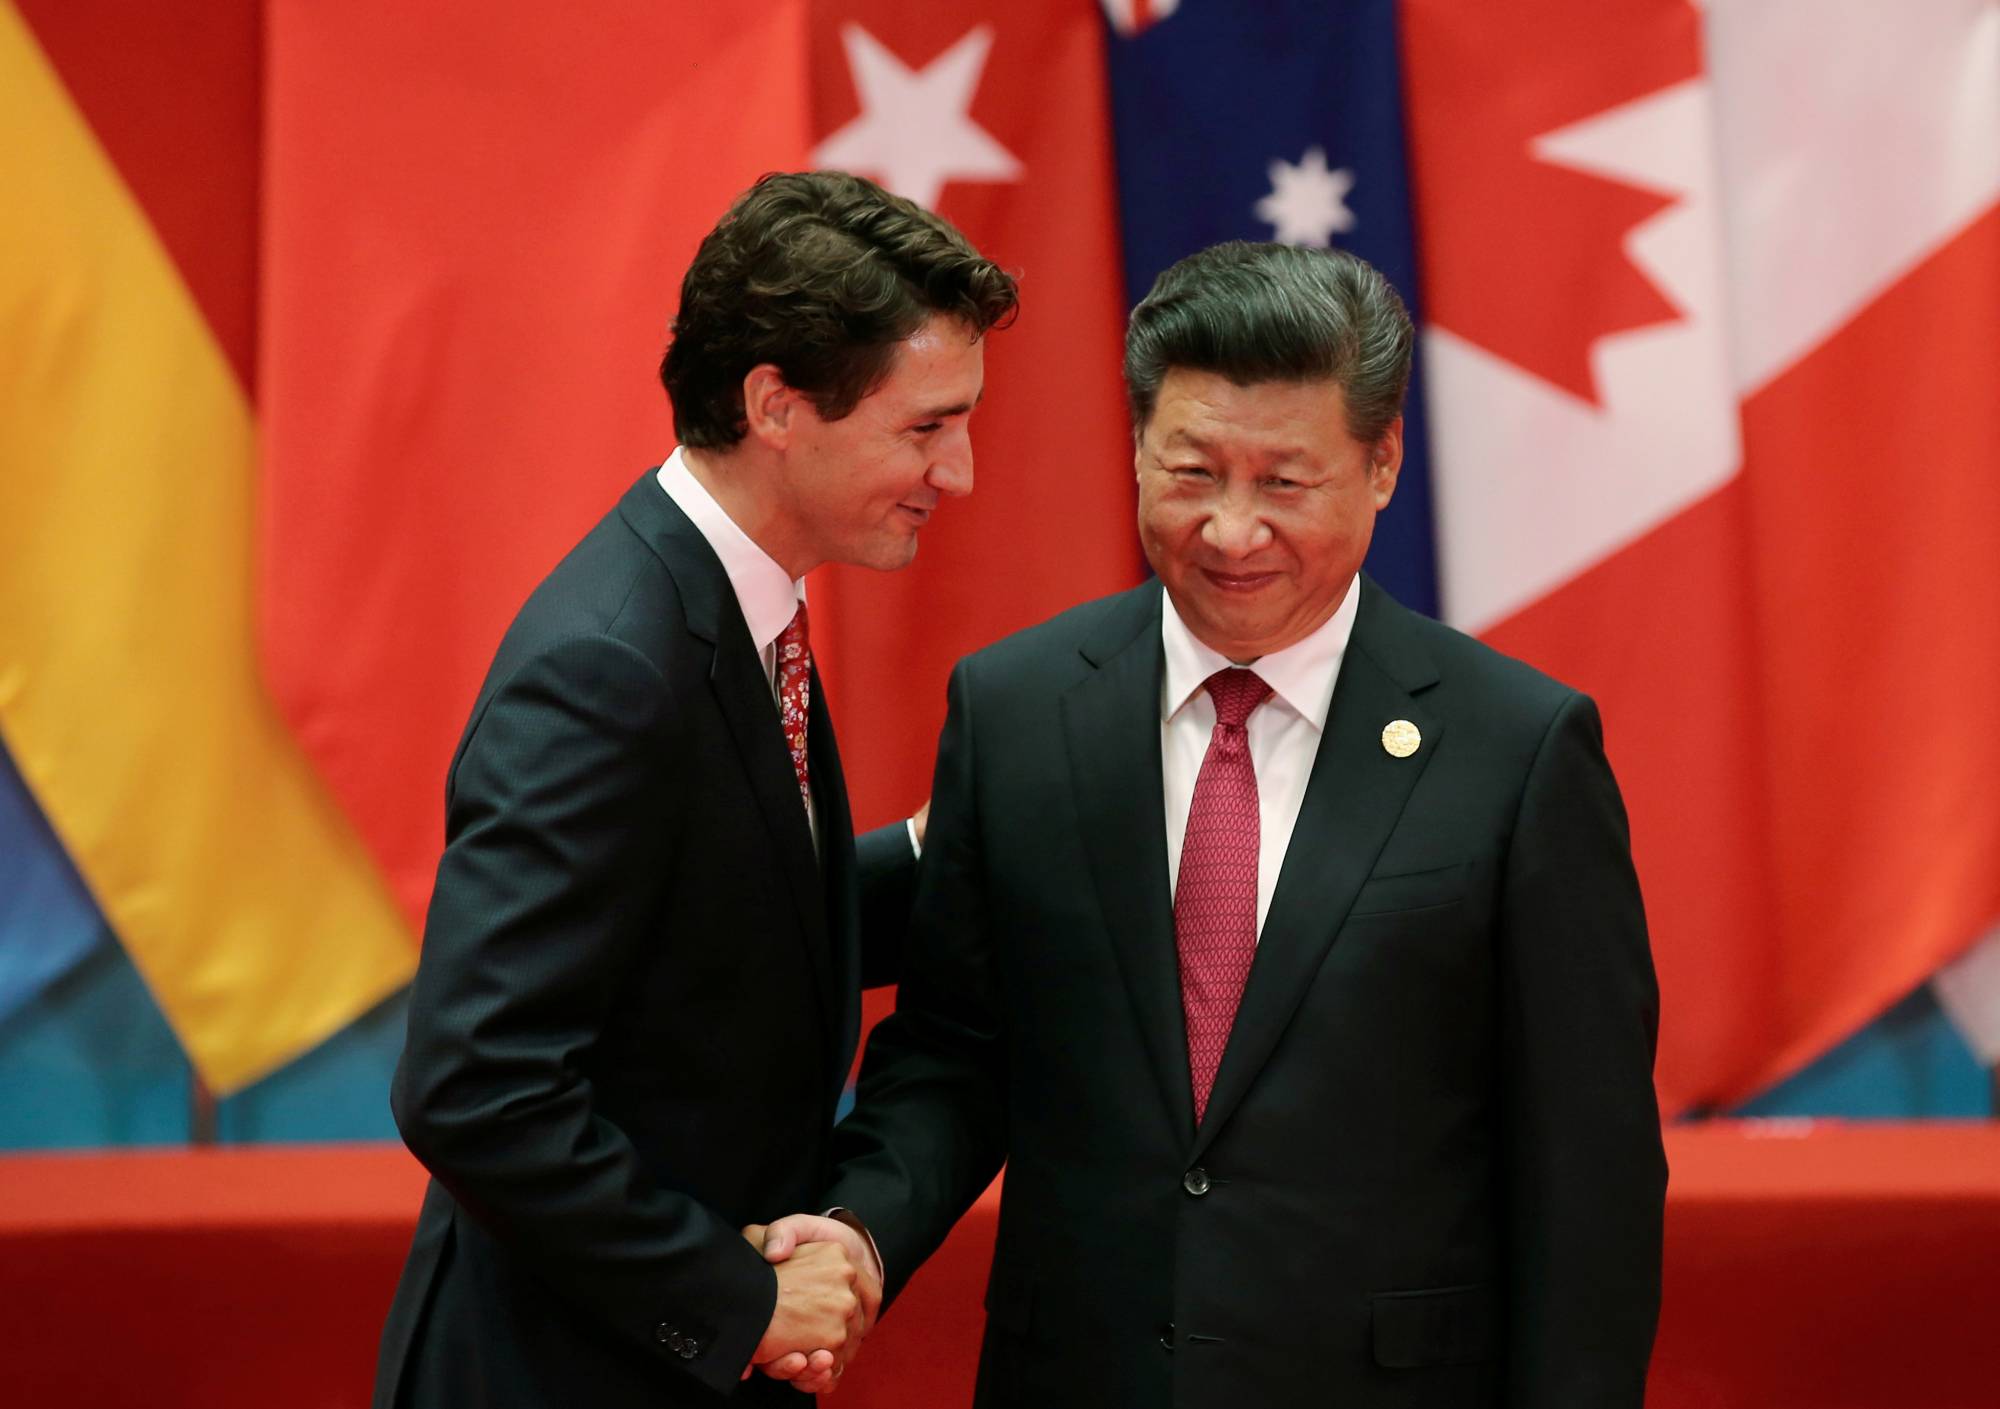 A shot at hostage diplomacy with China backfires in Canada | The Japan Times